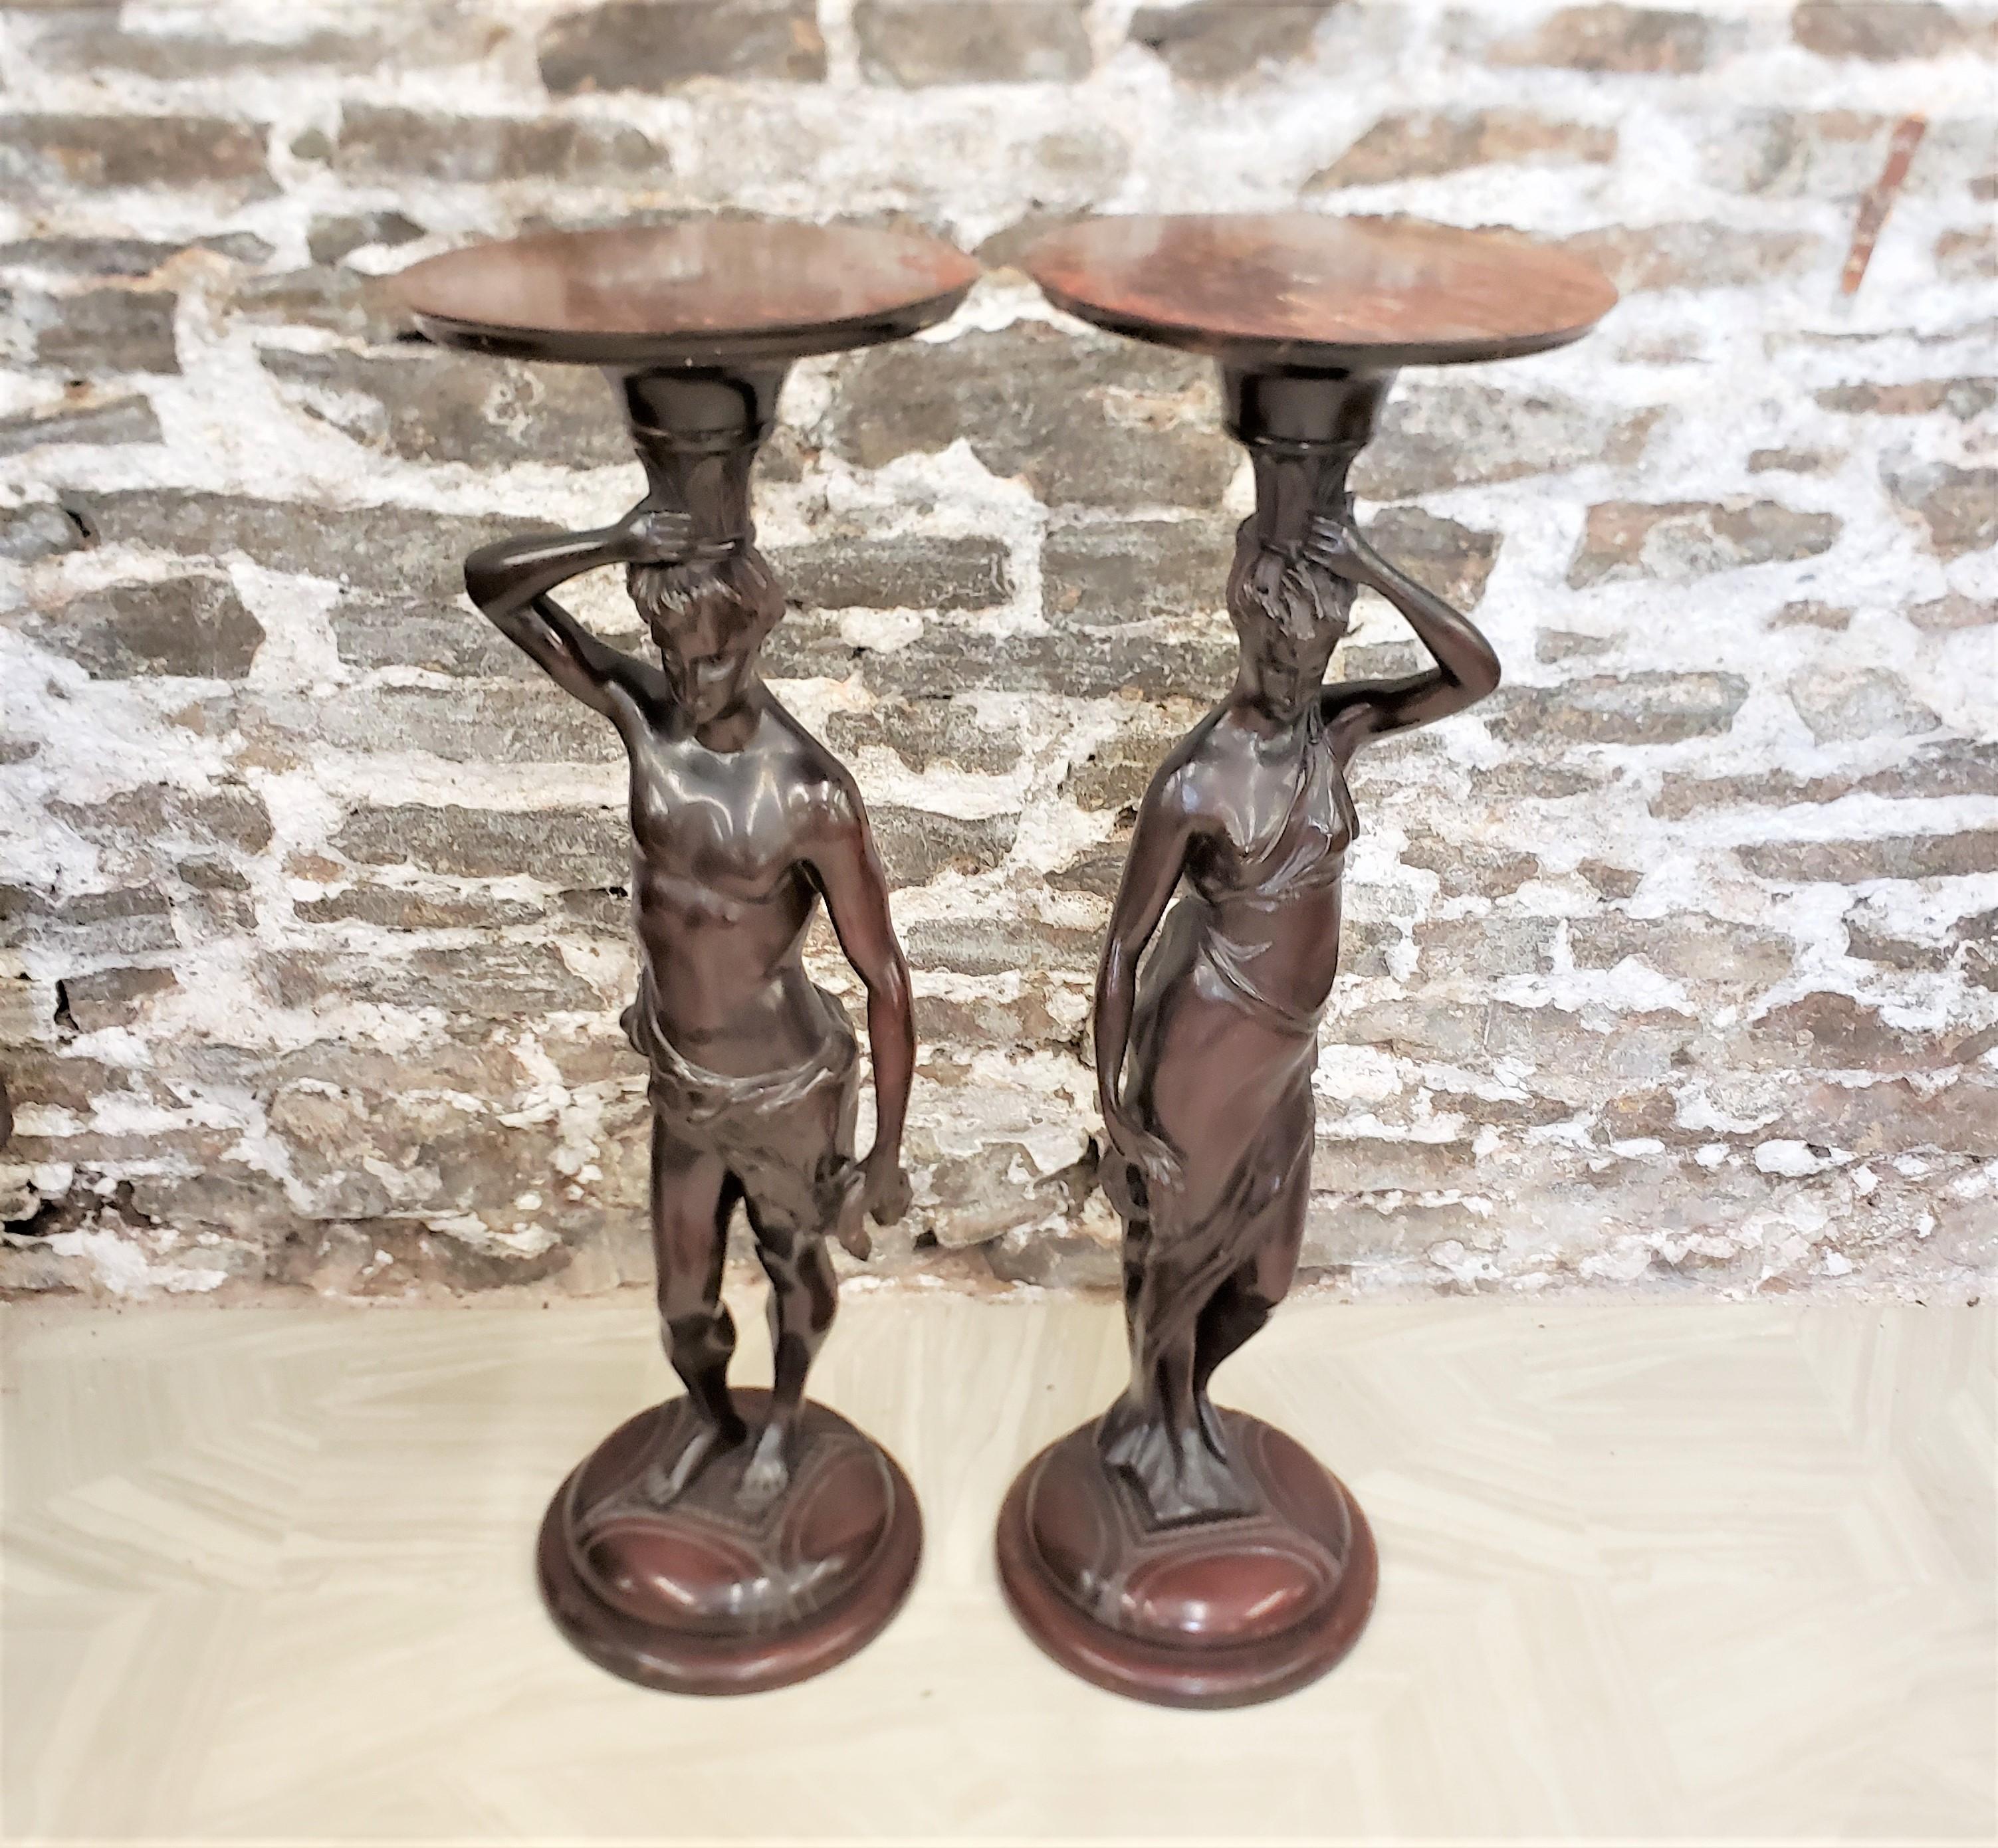 Pair of Antique Hand Carved Wooden Figural Pedestals of Neoclassical Figures In Good Condition For Sale In Hamilton, Ontario